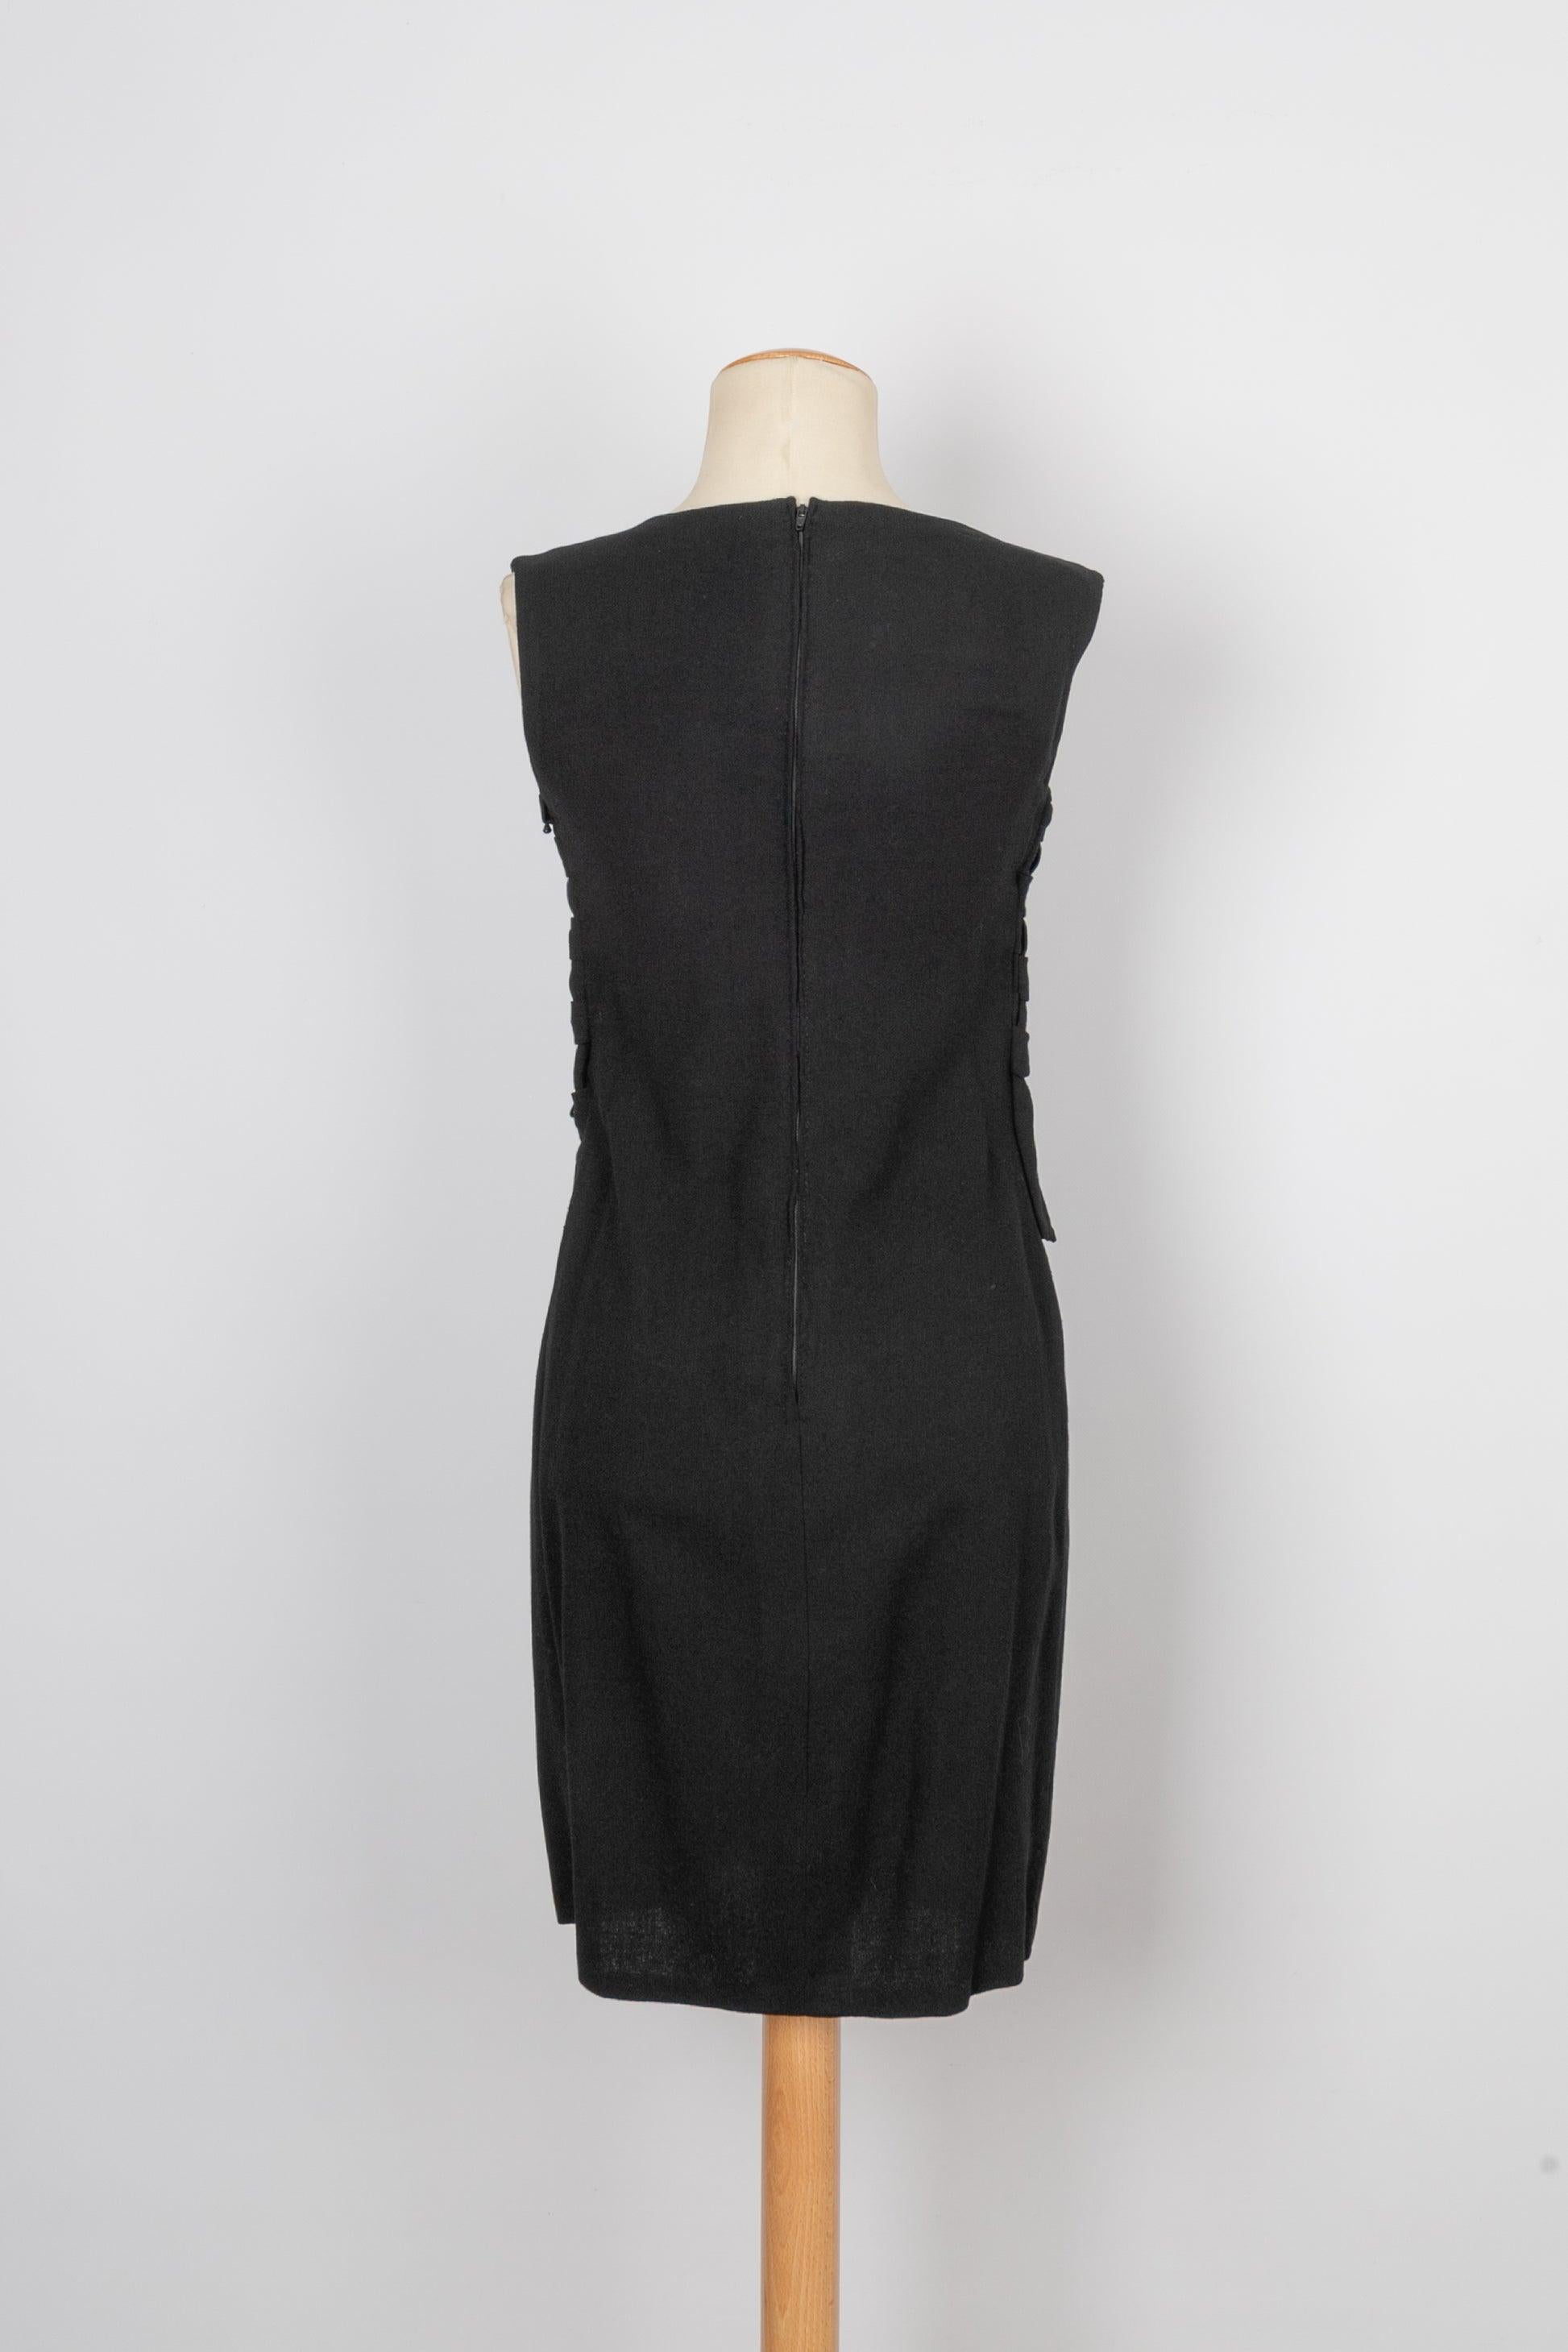 Wool Cheesecloth Dress Sewn with Black Glass Pearls, 1950s/60s In Excellent Condition For Sale In SAINT-OUEN-SUR-SEINE, FR